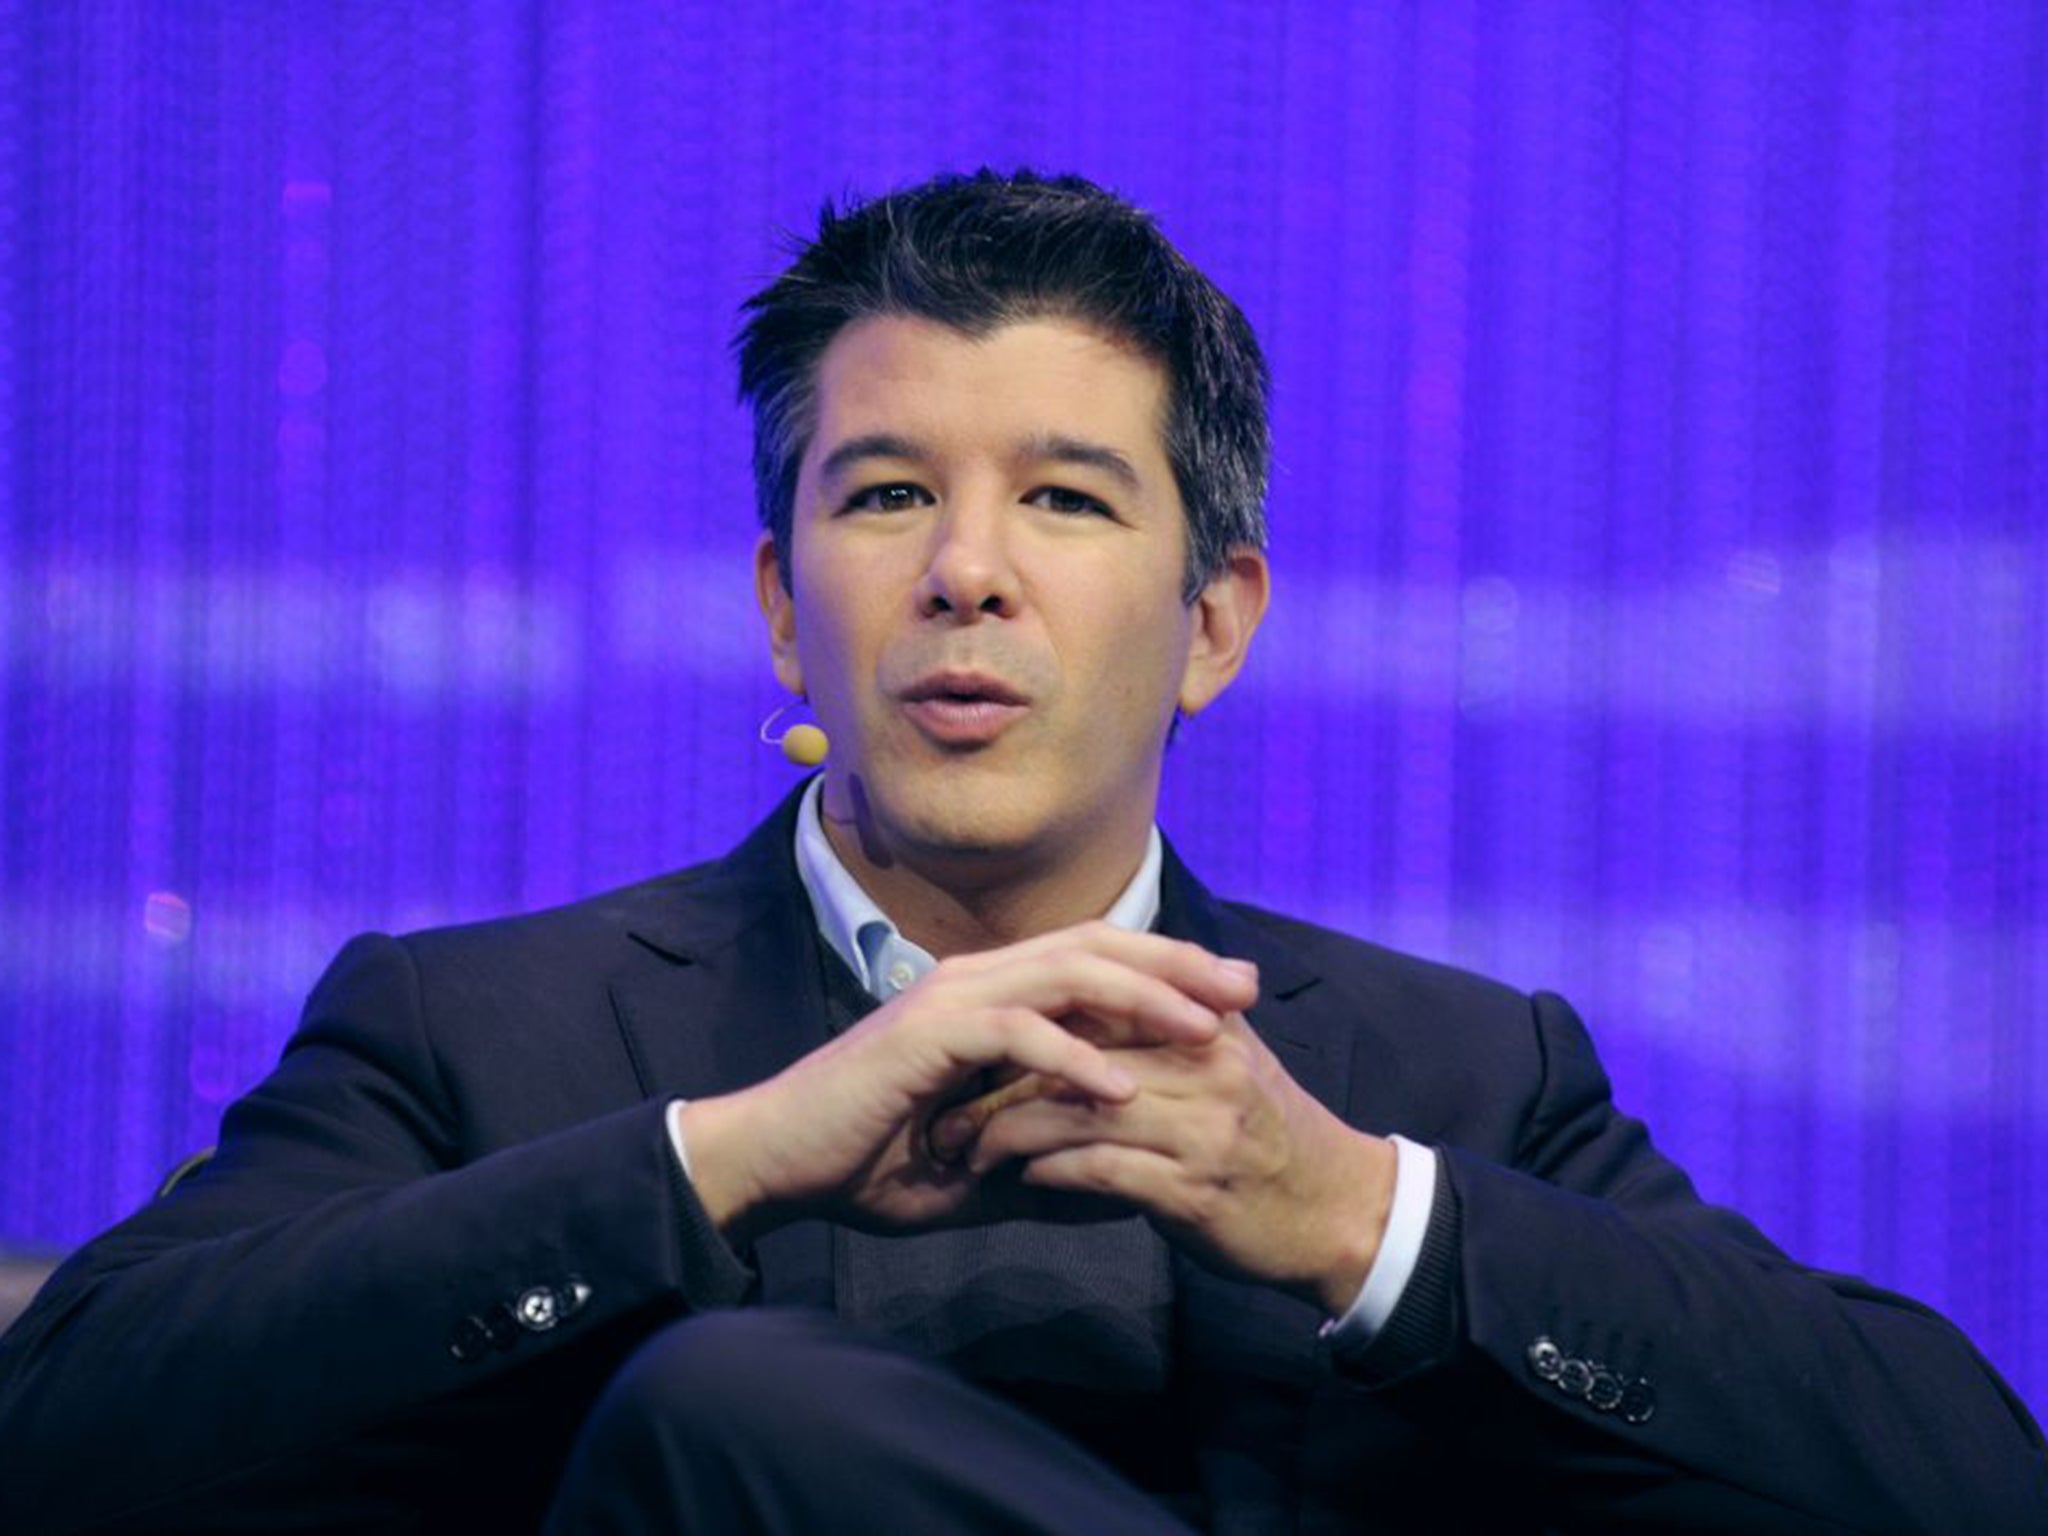 Travis Kalanick, the co-founder of Uber